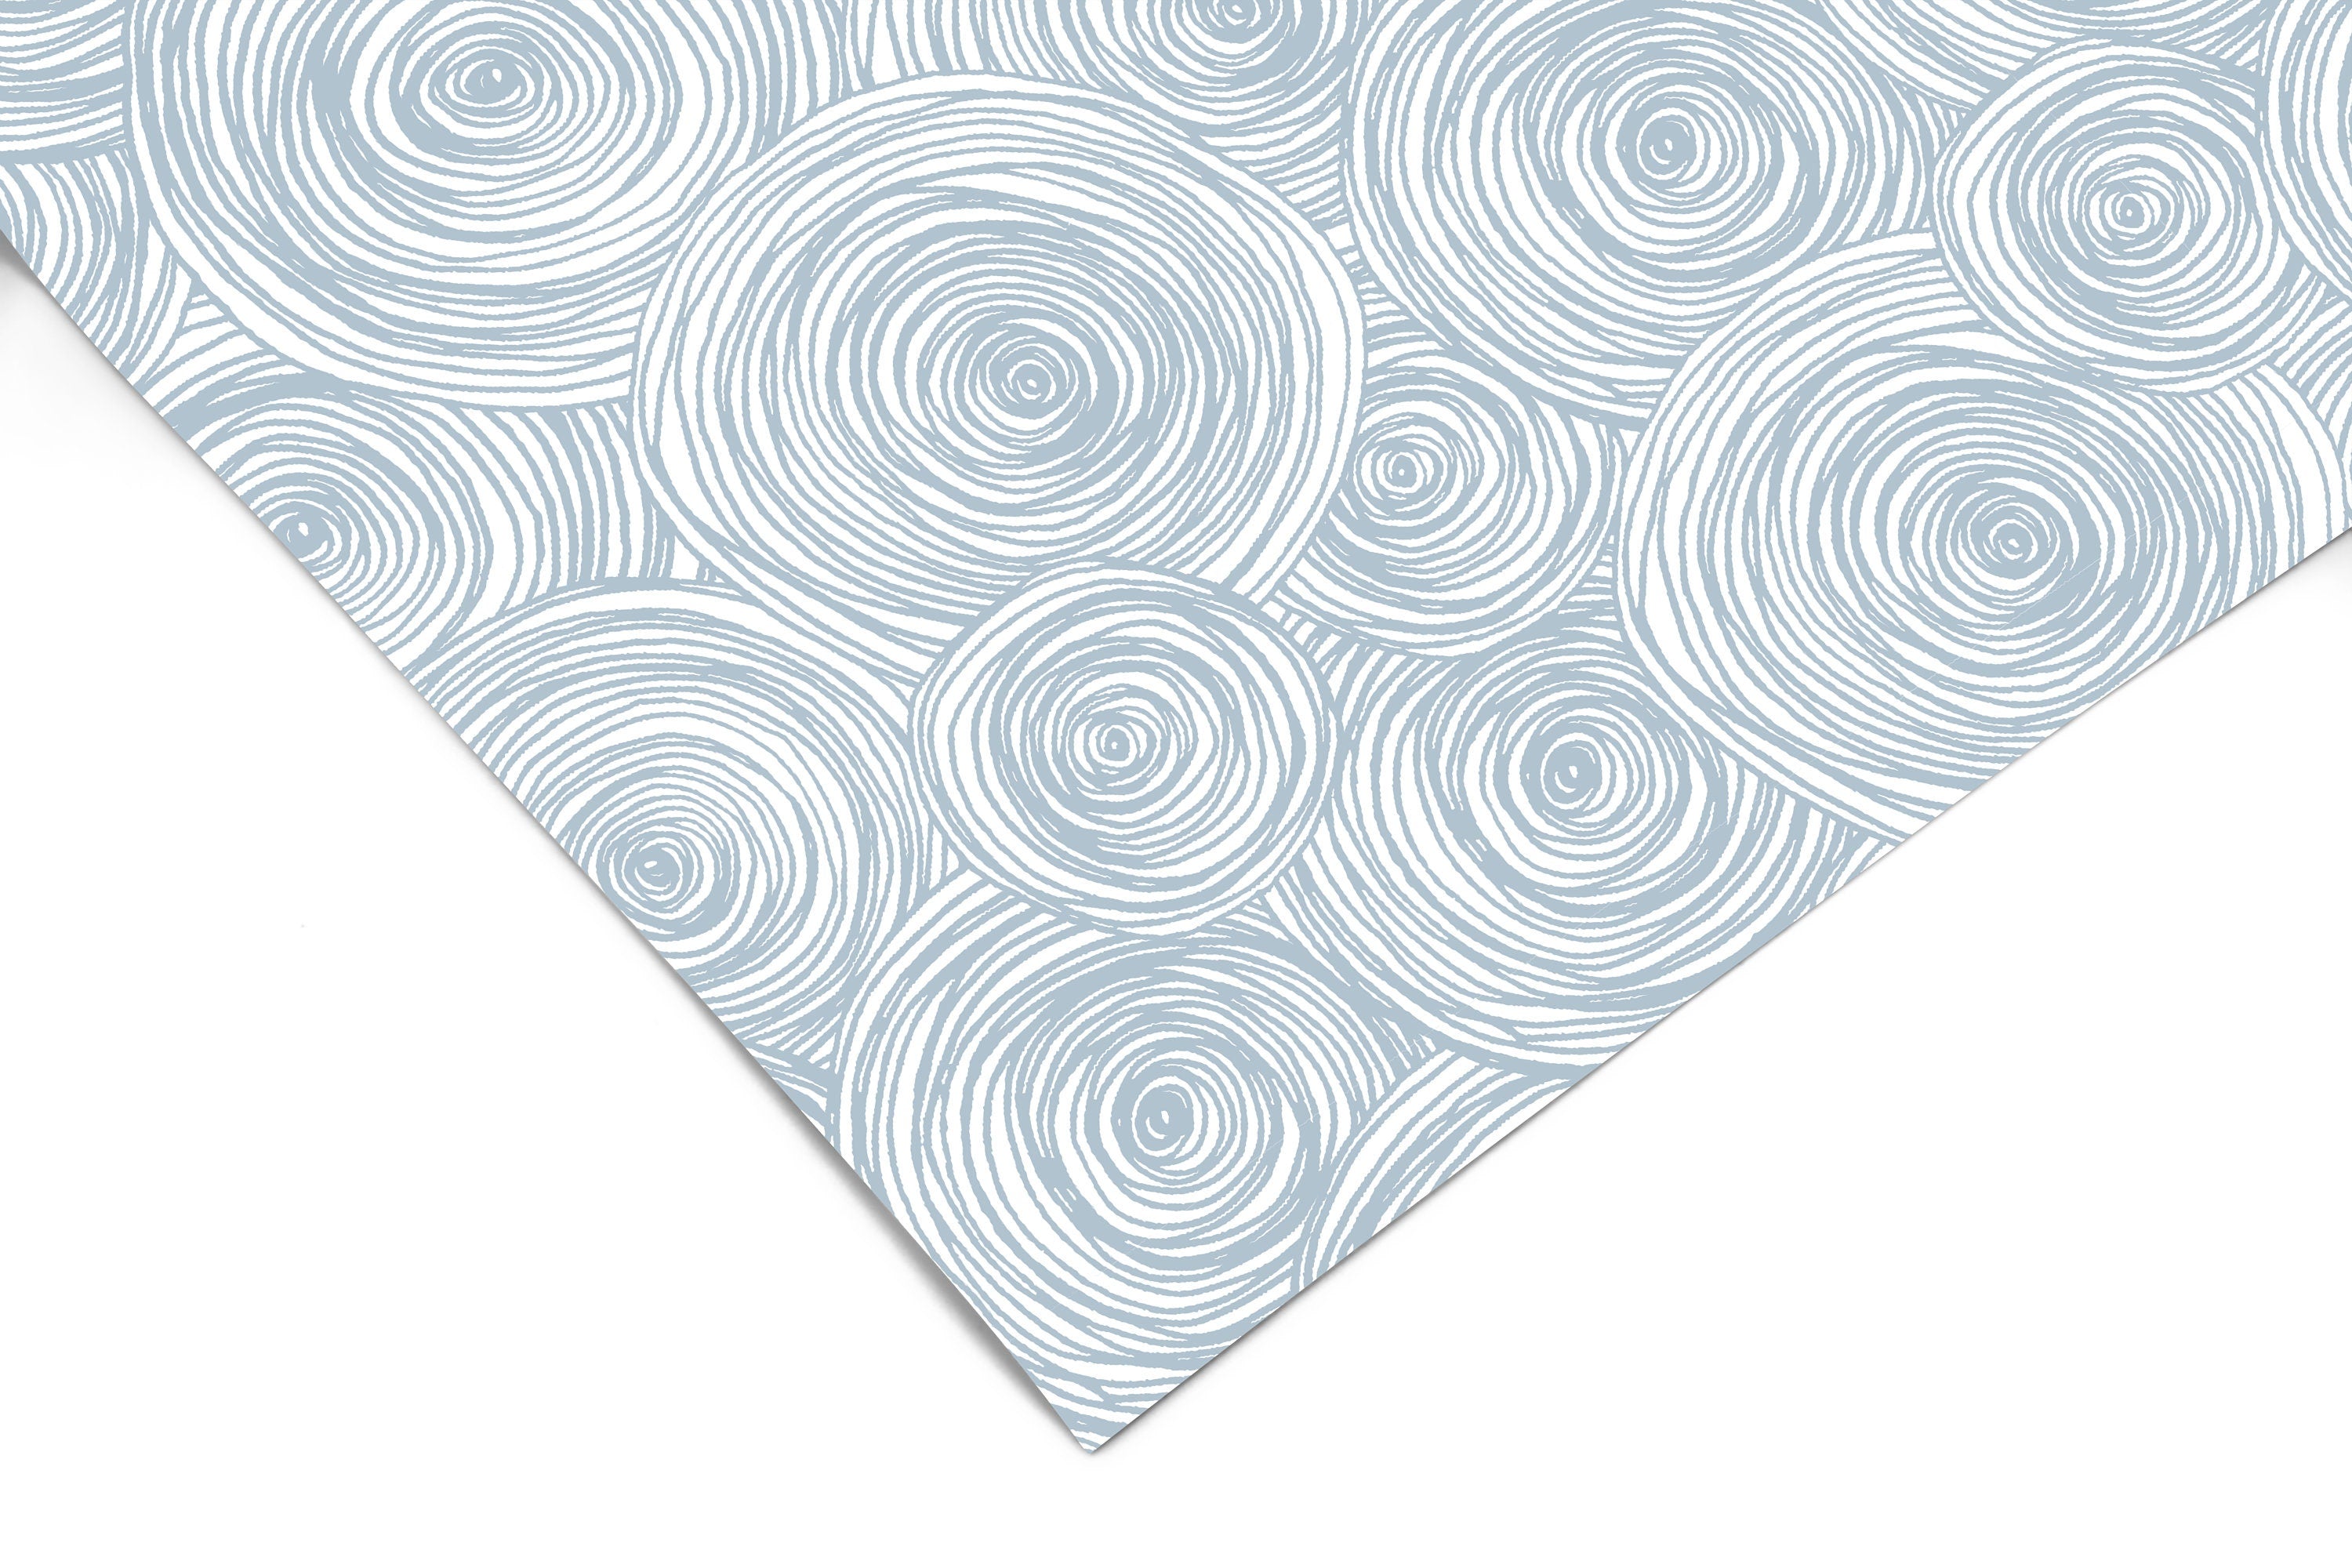 Contact Paper Blue Swirl | Peel And Stick Wallpaper | Removable Wallpaper | Shelf Liner | Drawer Liner | Peel and Stick Paper 877 - JamesAndColors